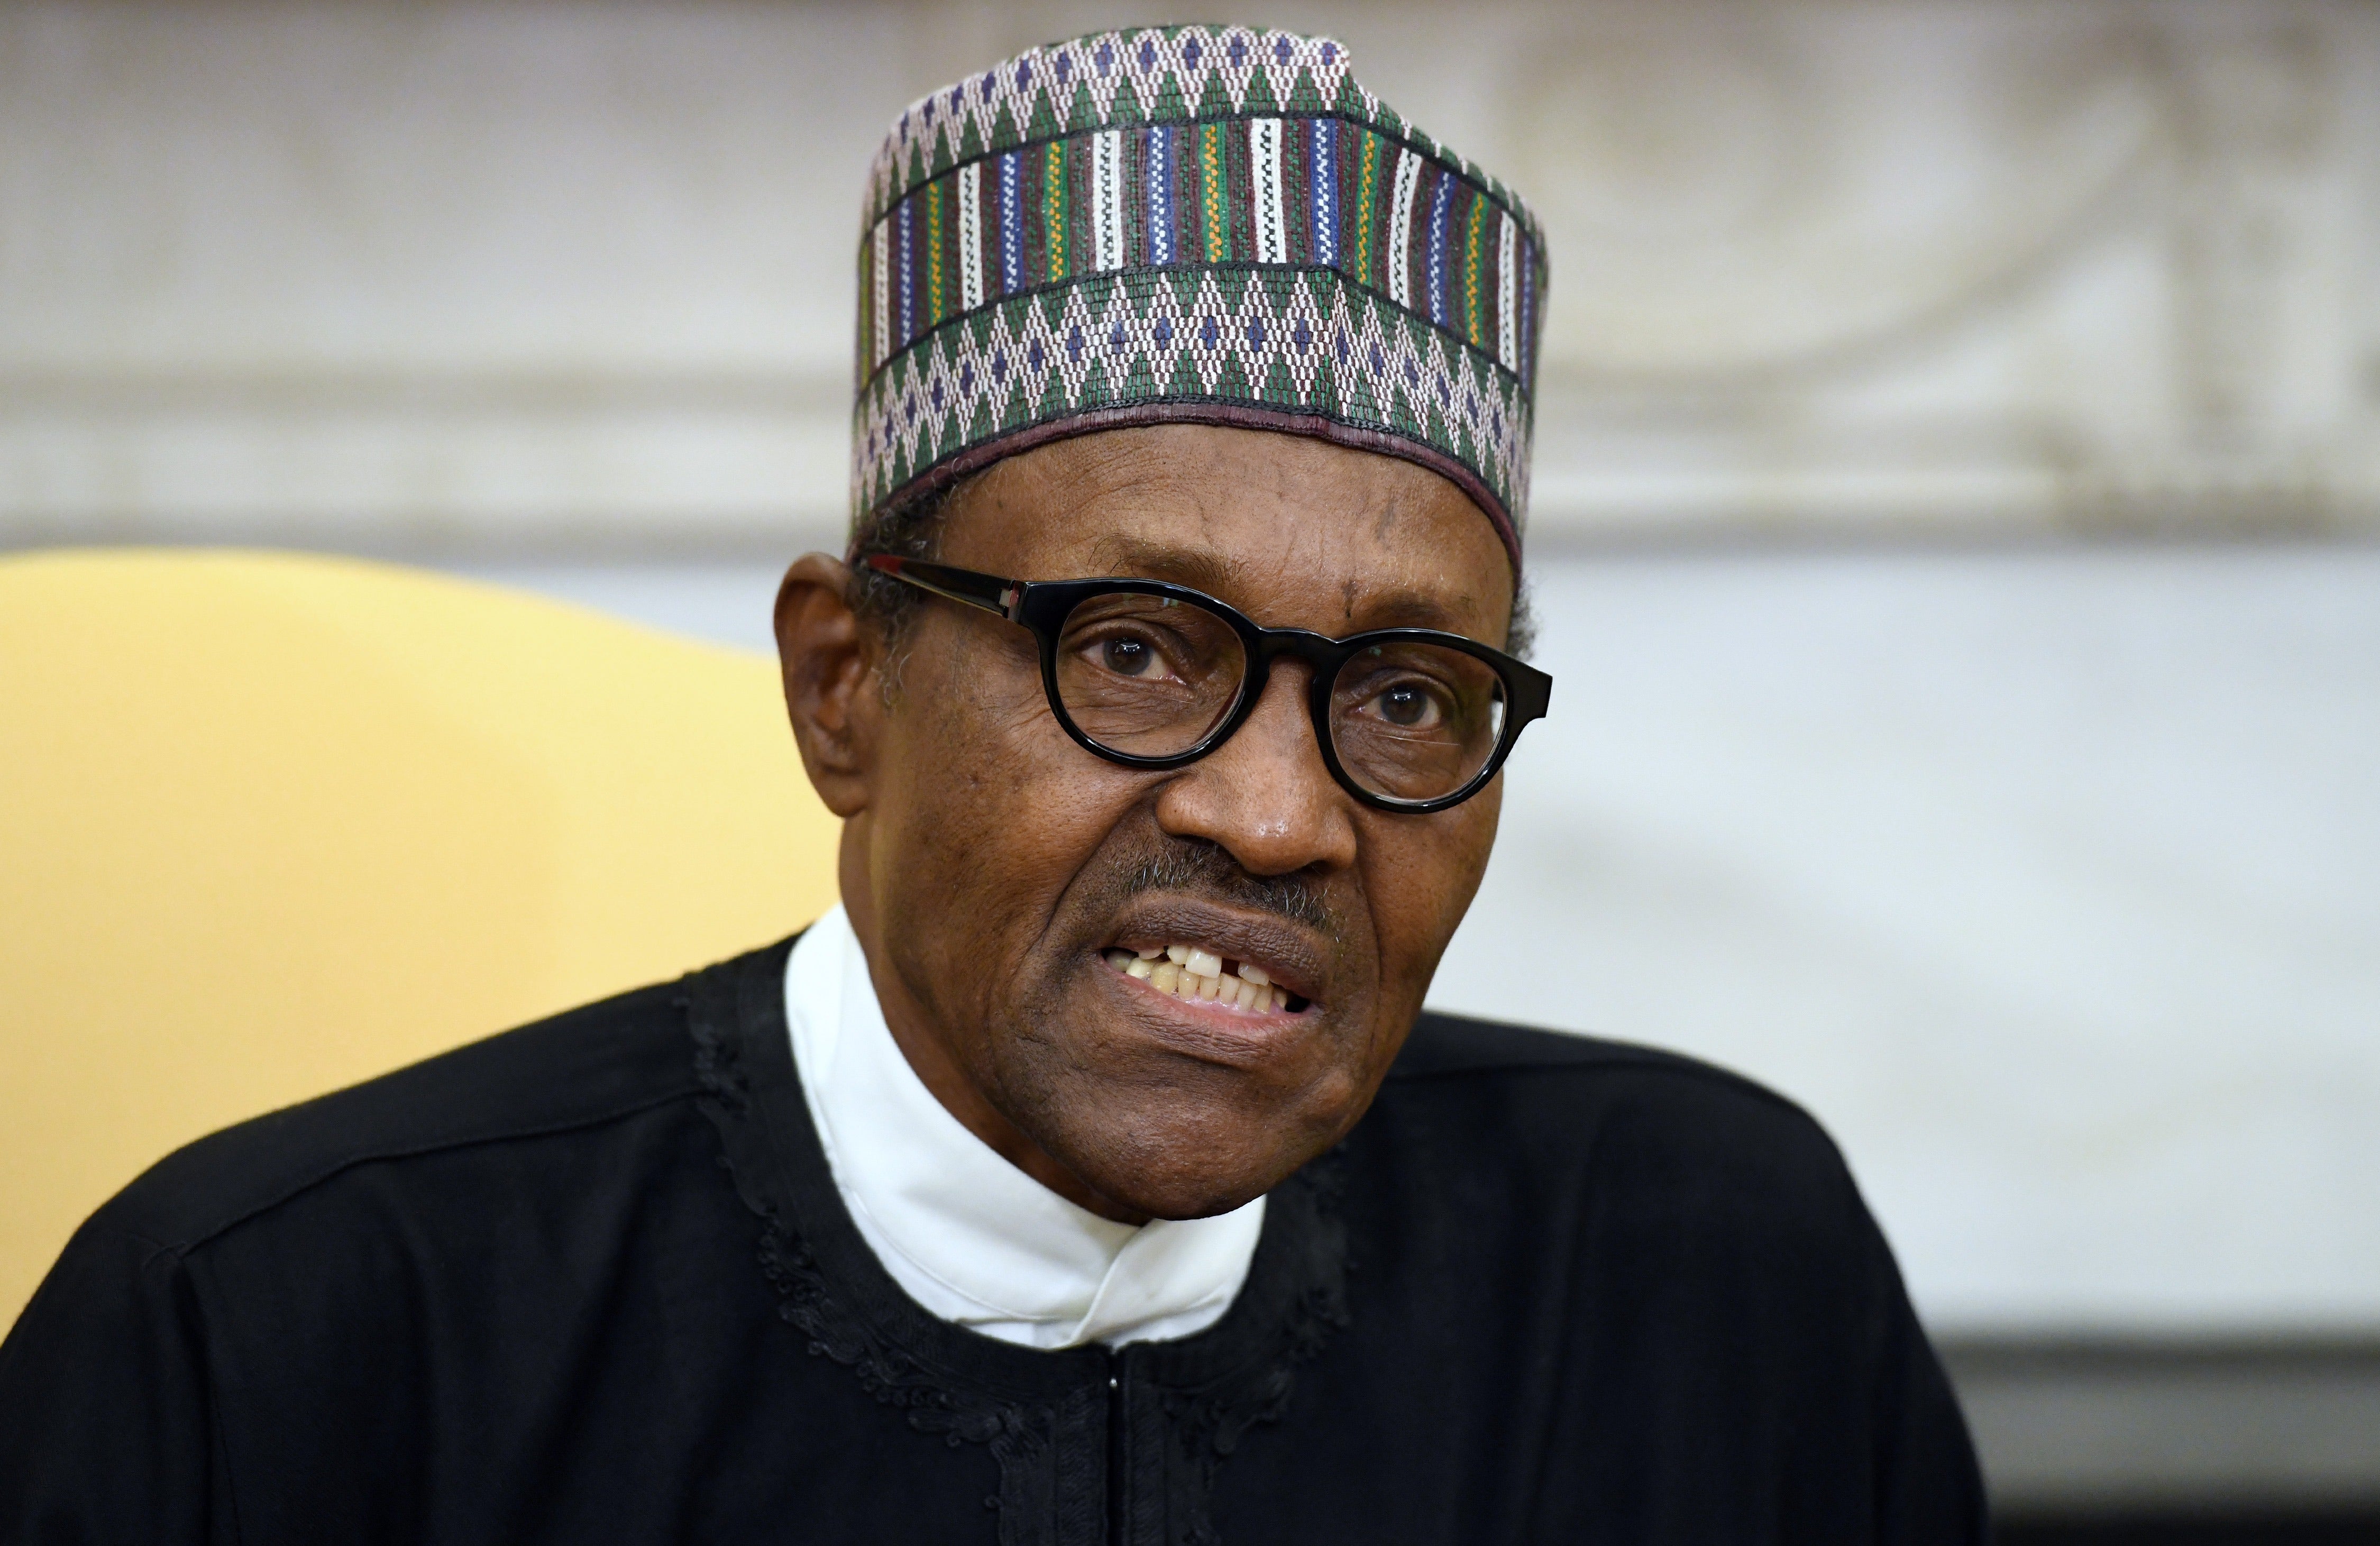 The Nigerian president’s statement comes as unemployment is particularly high